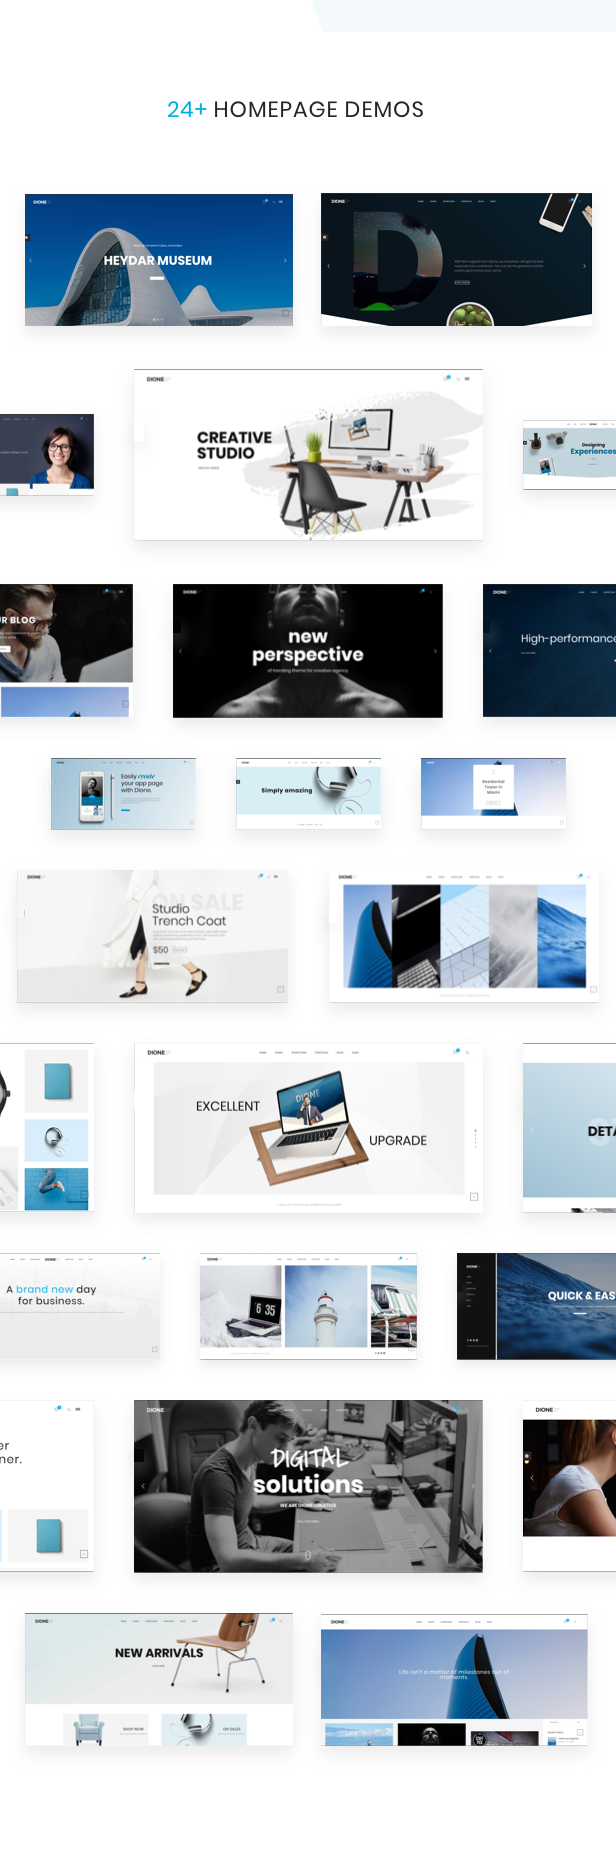 Business Agency WordPress Theme - Great Homepages